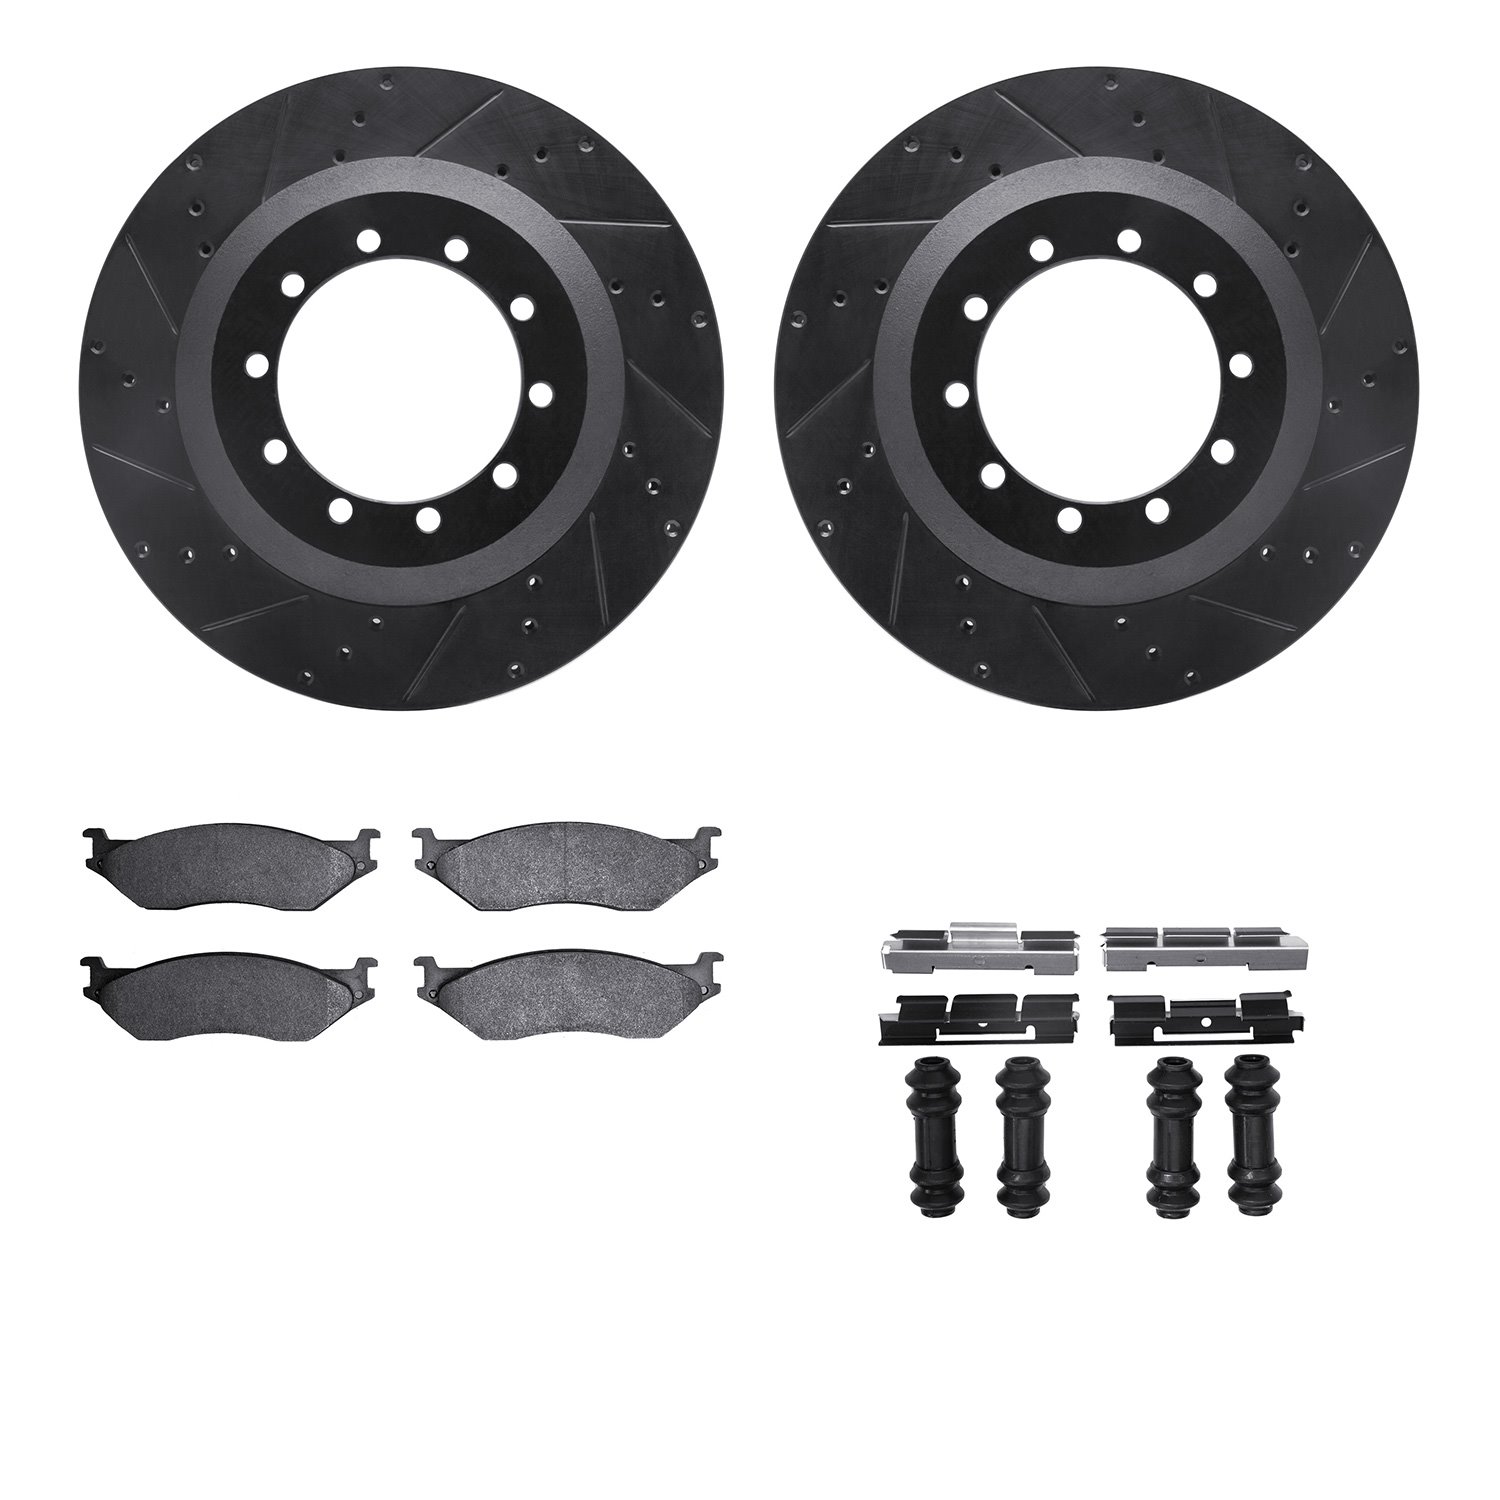 8412-54045 Drilled/Slotted Brake Rotors with Ultimate-Duty Brake Pads Kit & Hardware [Black], 1999-2004 Ford/Lincoln/Mercury/Maz